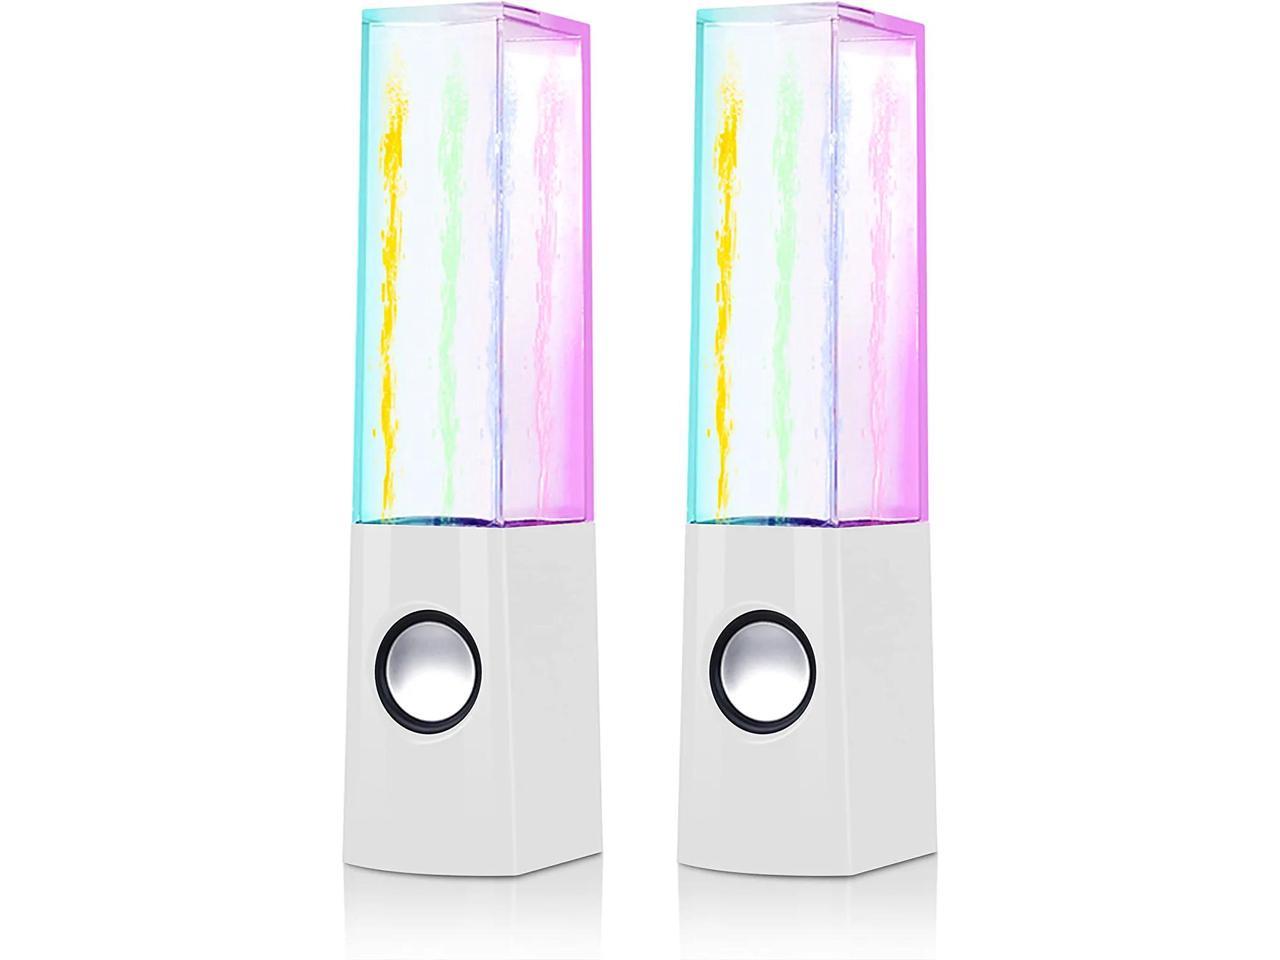 Aoboo Led Color Computer Water Speakers with Light, USB Dancing Fountain